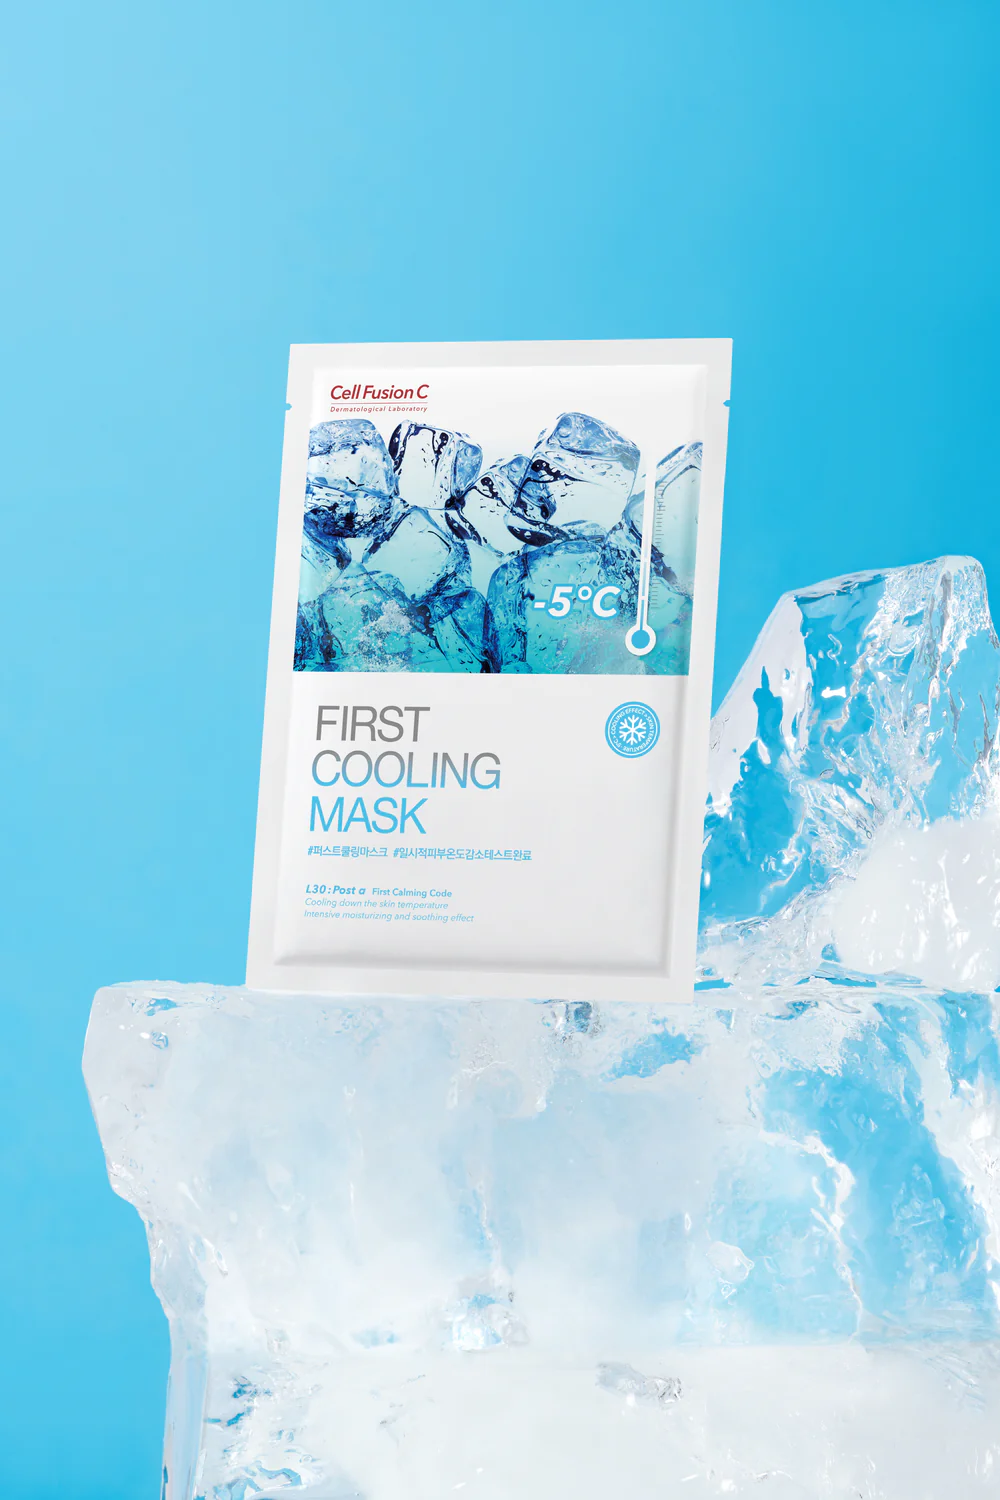 [Cell Fusion C] Post Alpha First Cooling Mask (27g* 5 sheets)